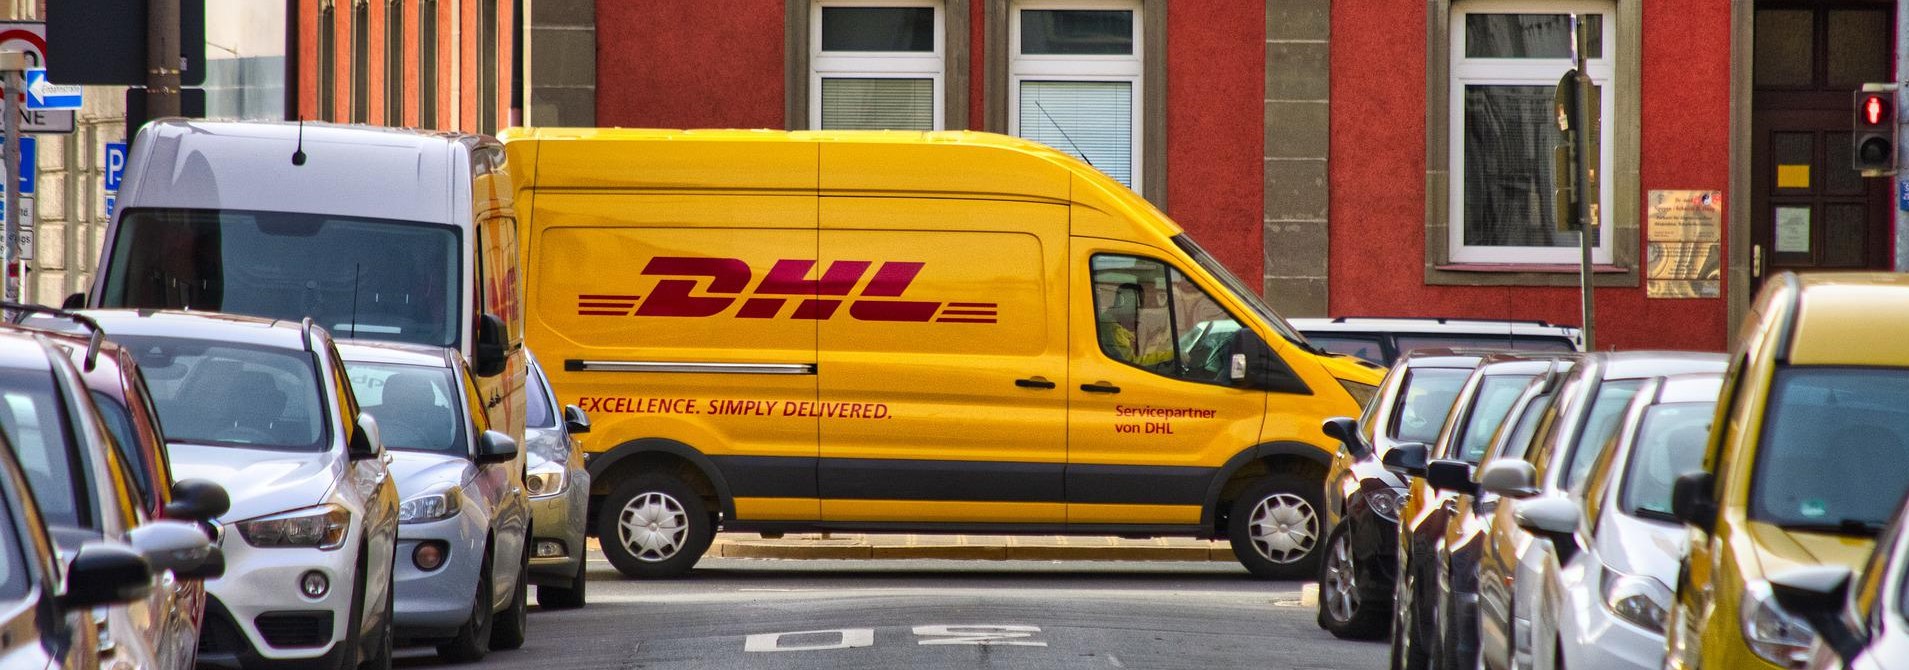 DHL Corporate Name